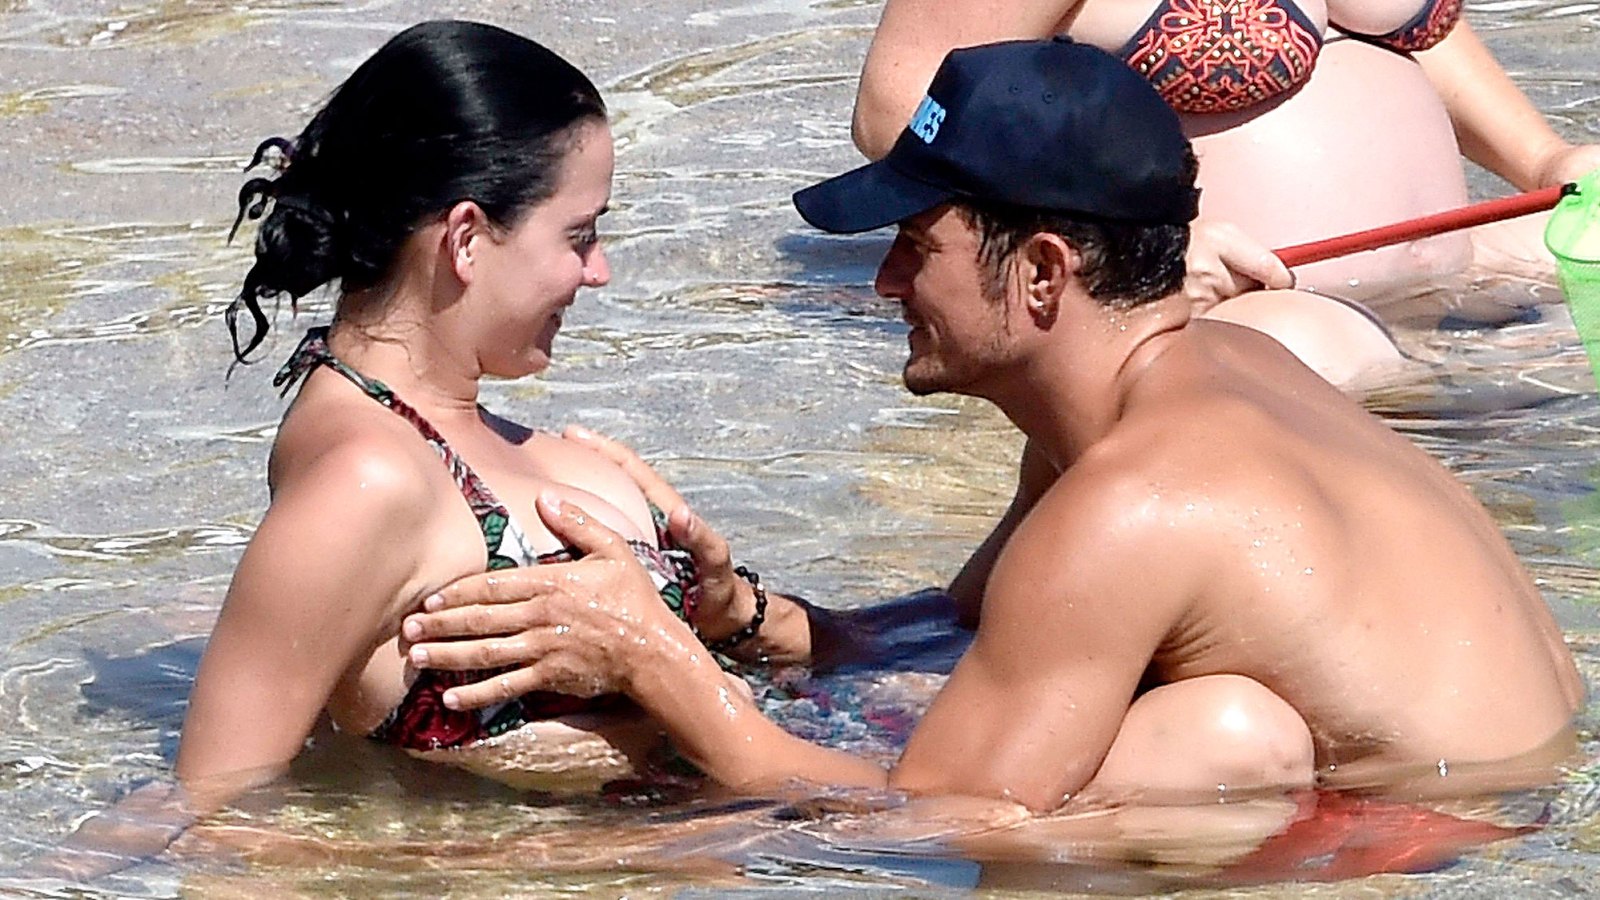 Katty Perry Moms Porn - Orlando Bloom Grabs Katy Perry's Boobs During Beach Vacation